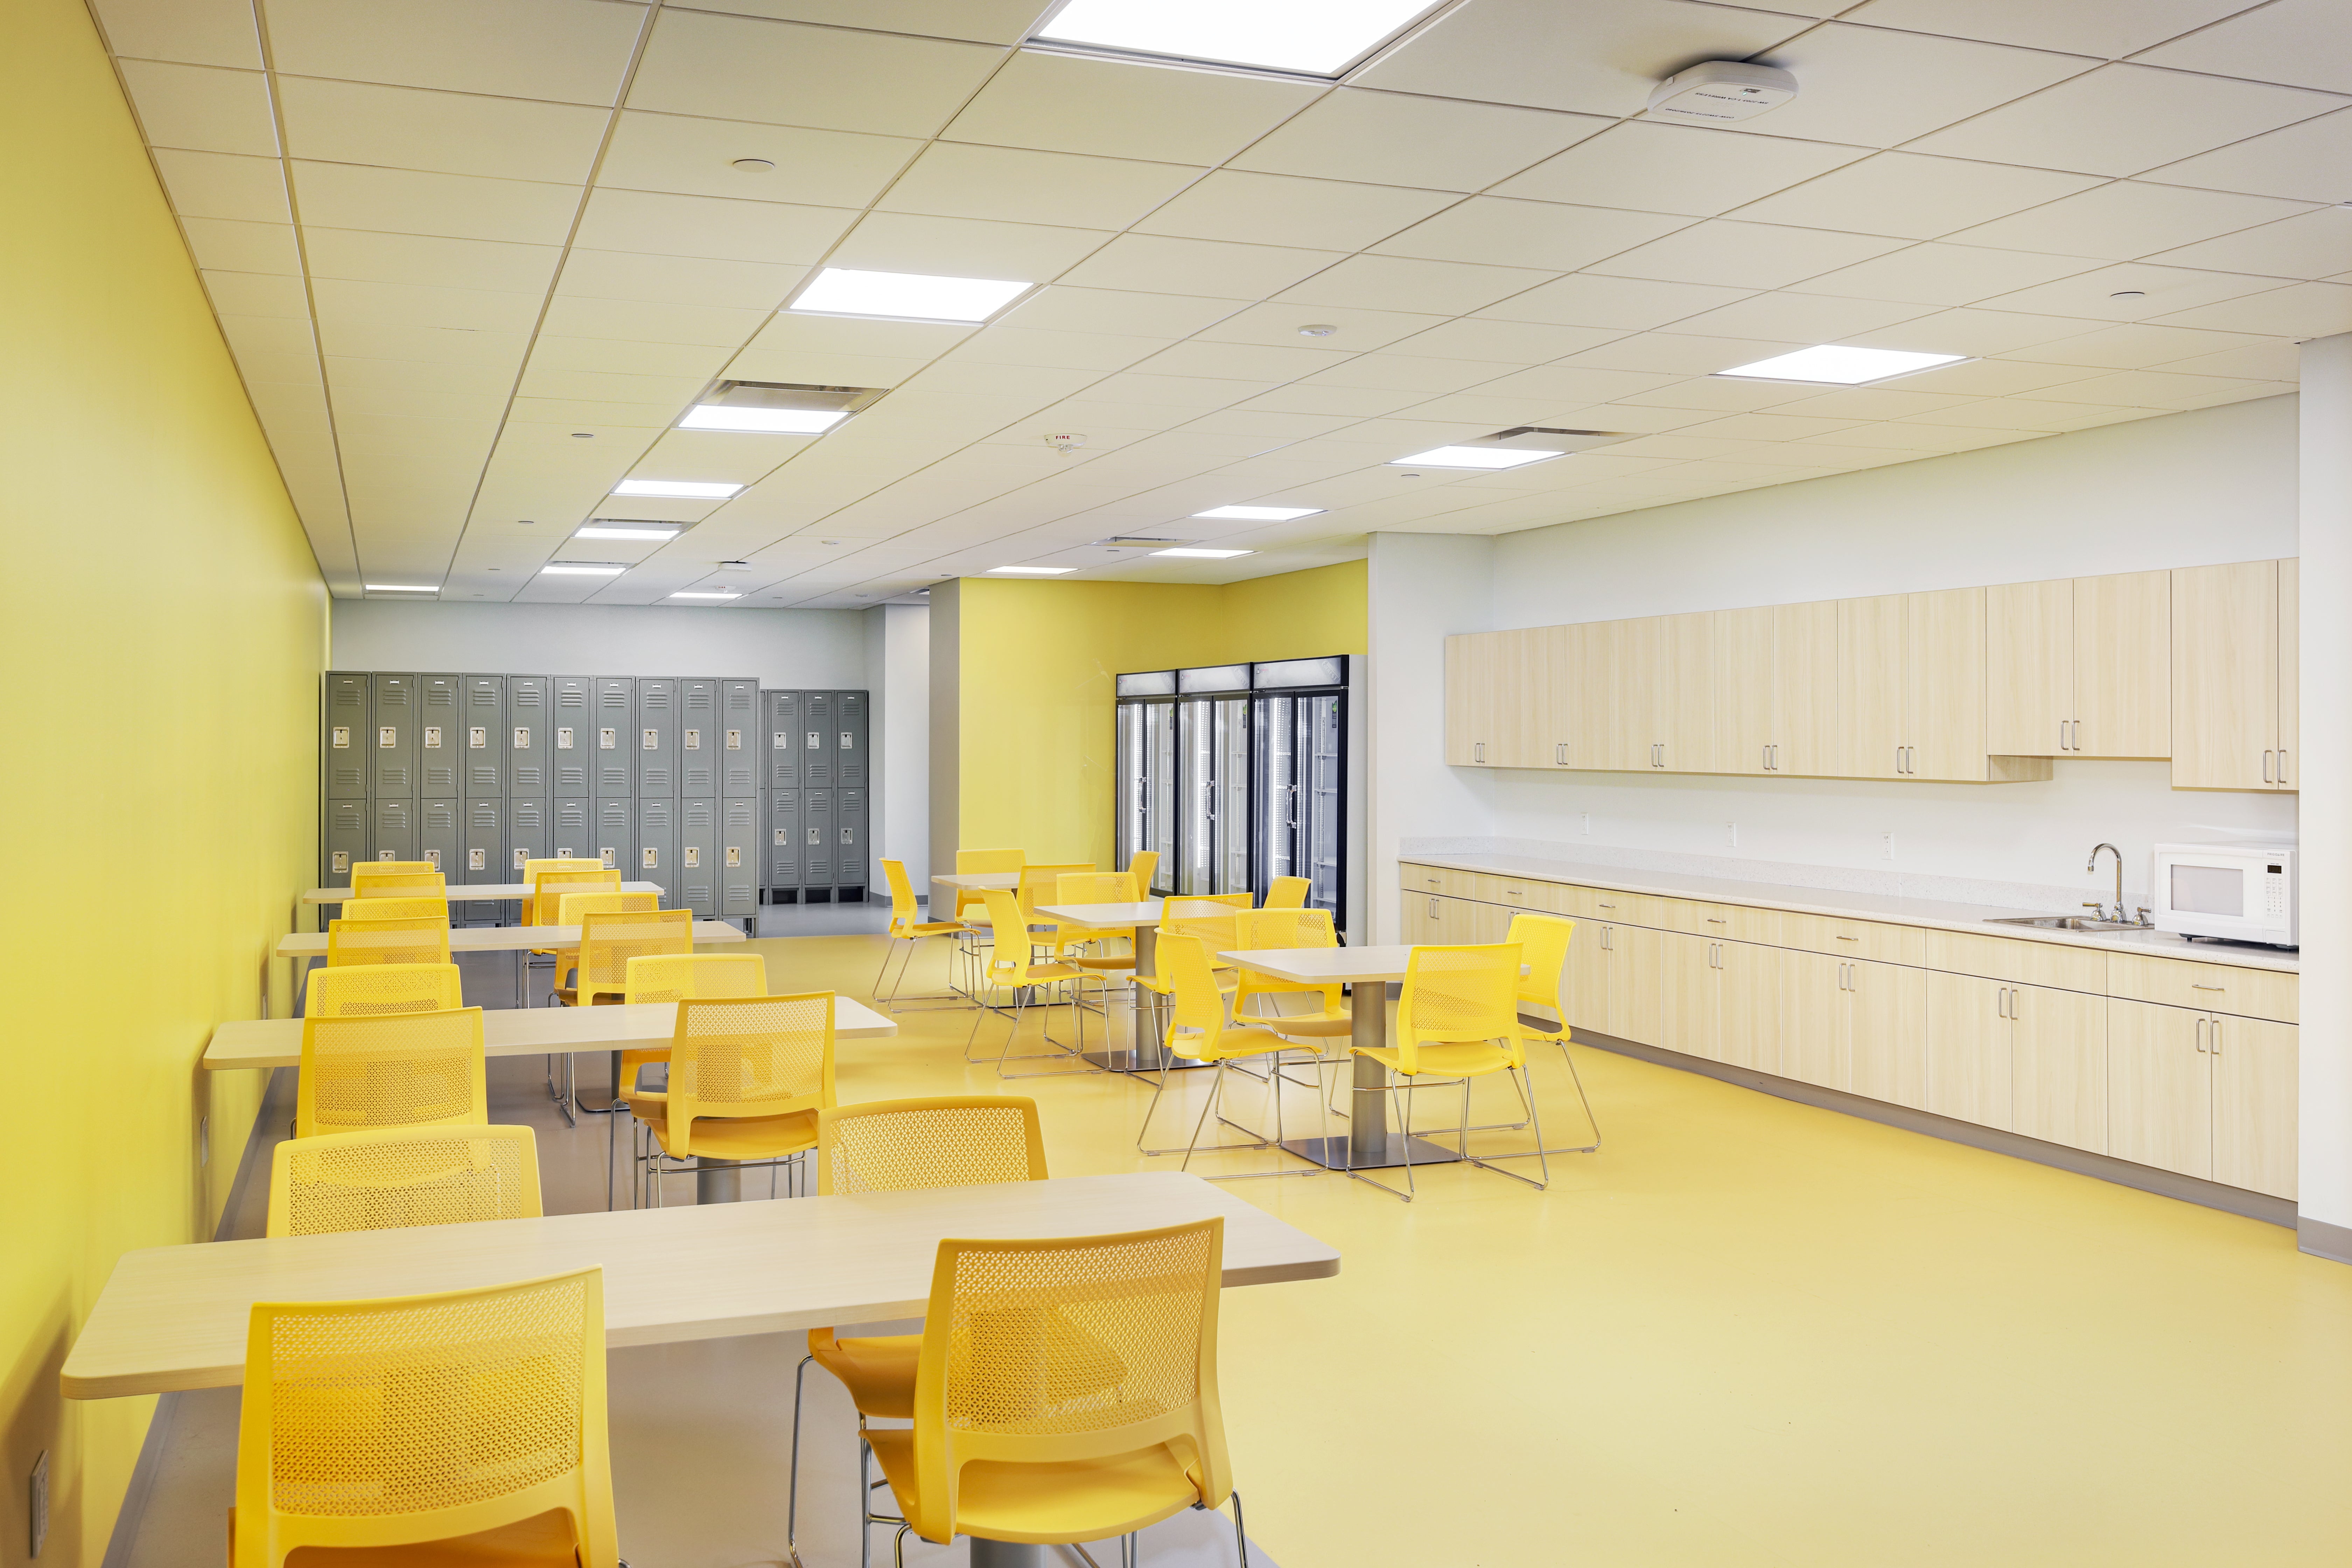 Room with lockers and with yellow accents, tables and chairs